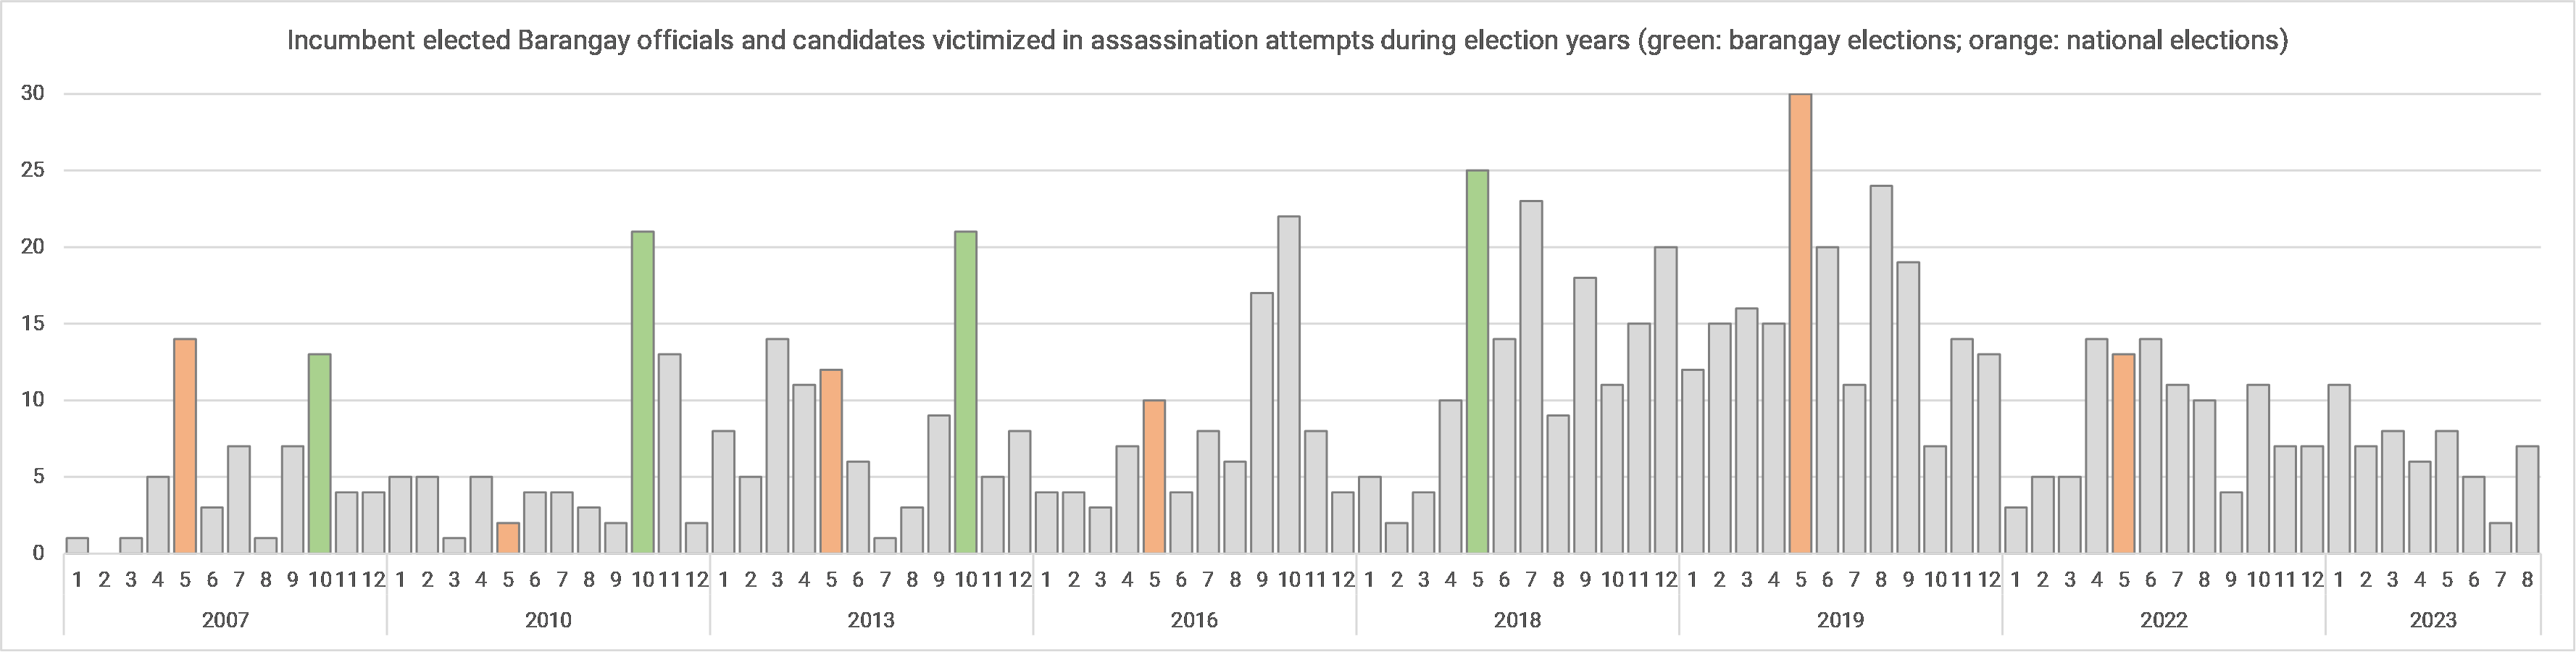 Table showing incumbent elected Barangay politicians and candidates victimized in assassination attempts during election years 